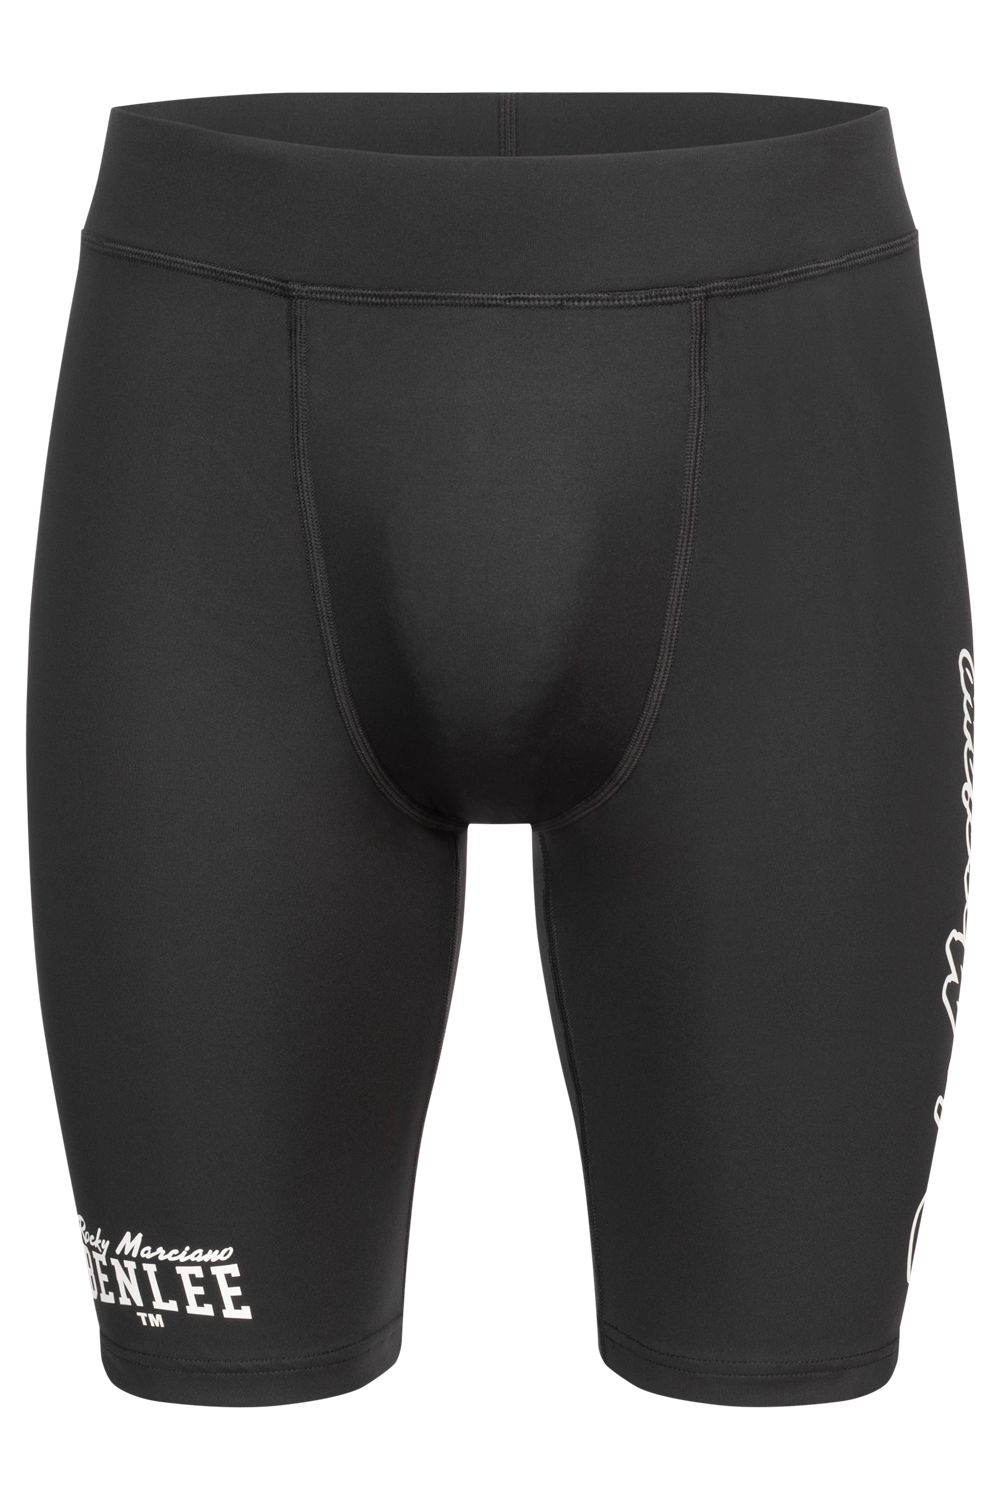 Levně Lonsdale Mens compression shorts with cup groin protection